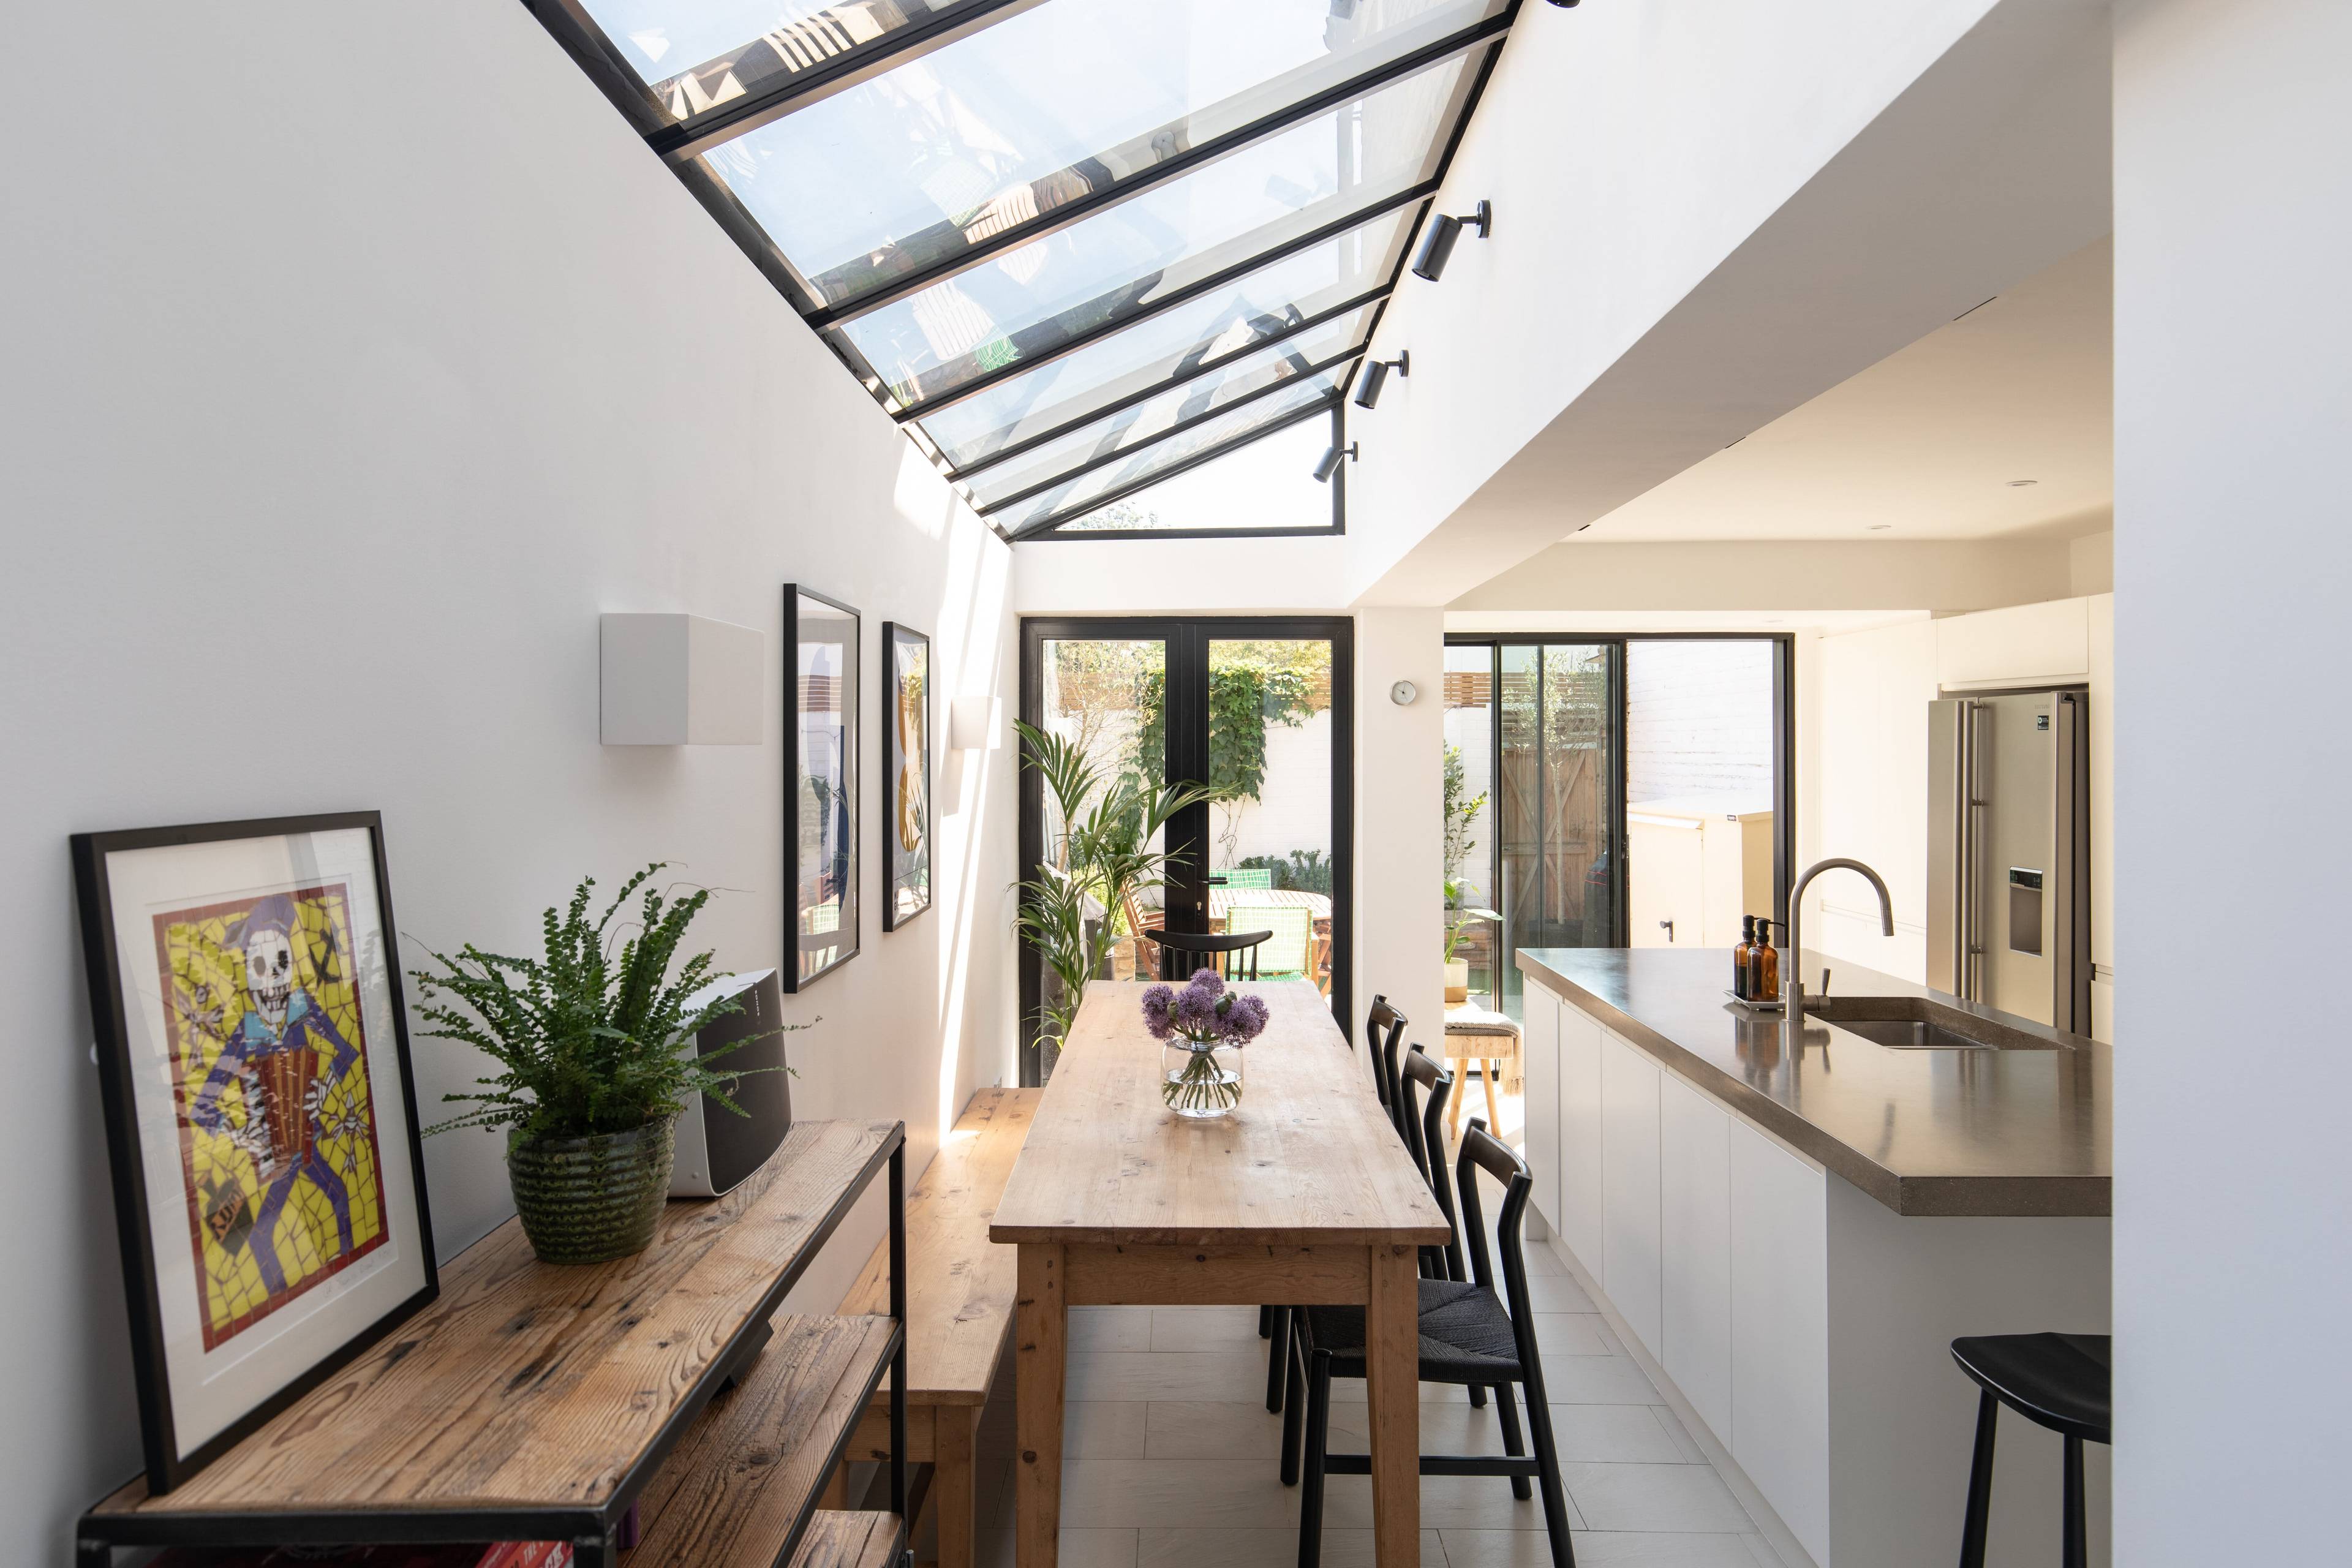 Stylish four bedroom family home with beautifully extended kitchen/diner, exposed brickwork  and low maintenance garden  in the heart of buzzing Peckham Rye.